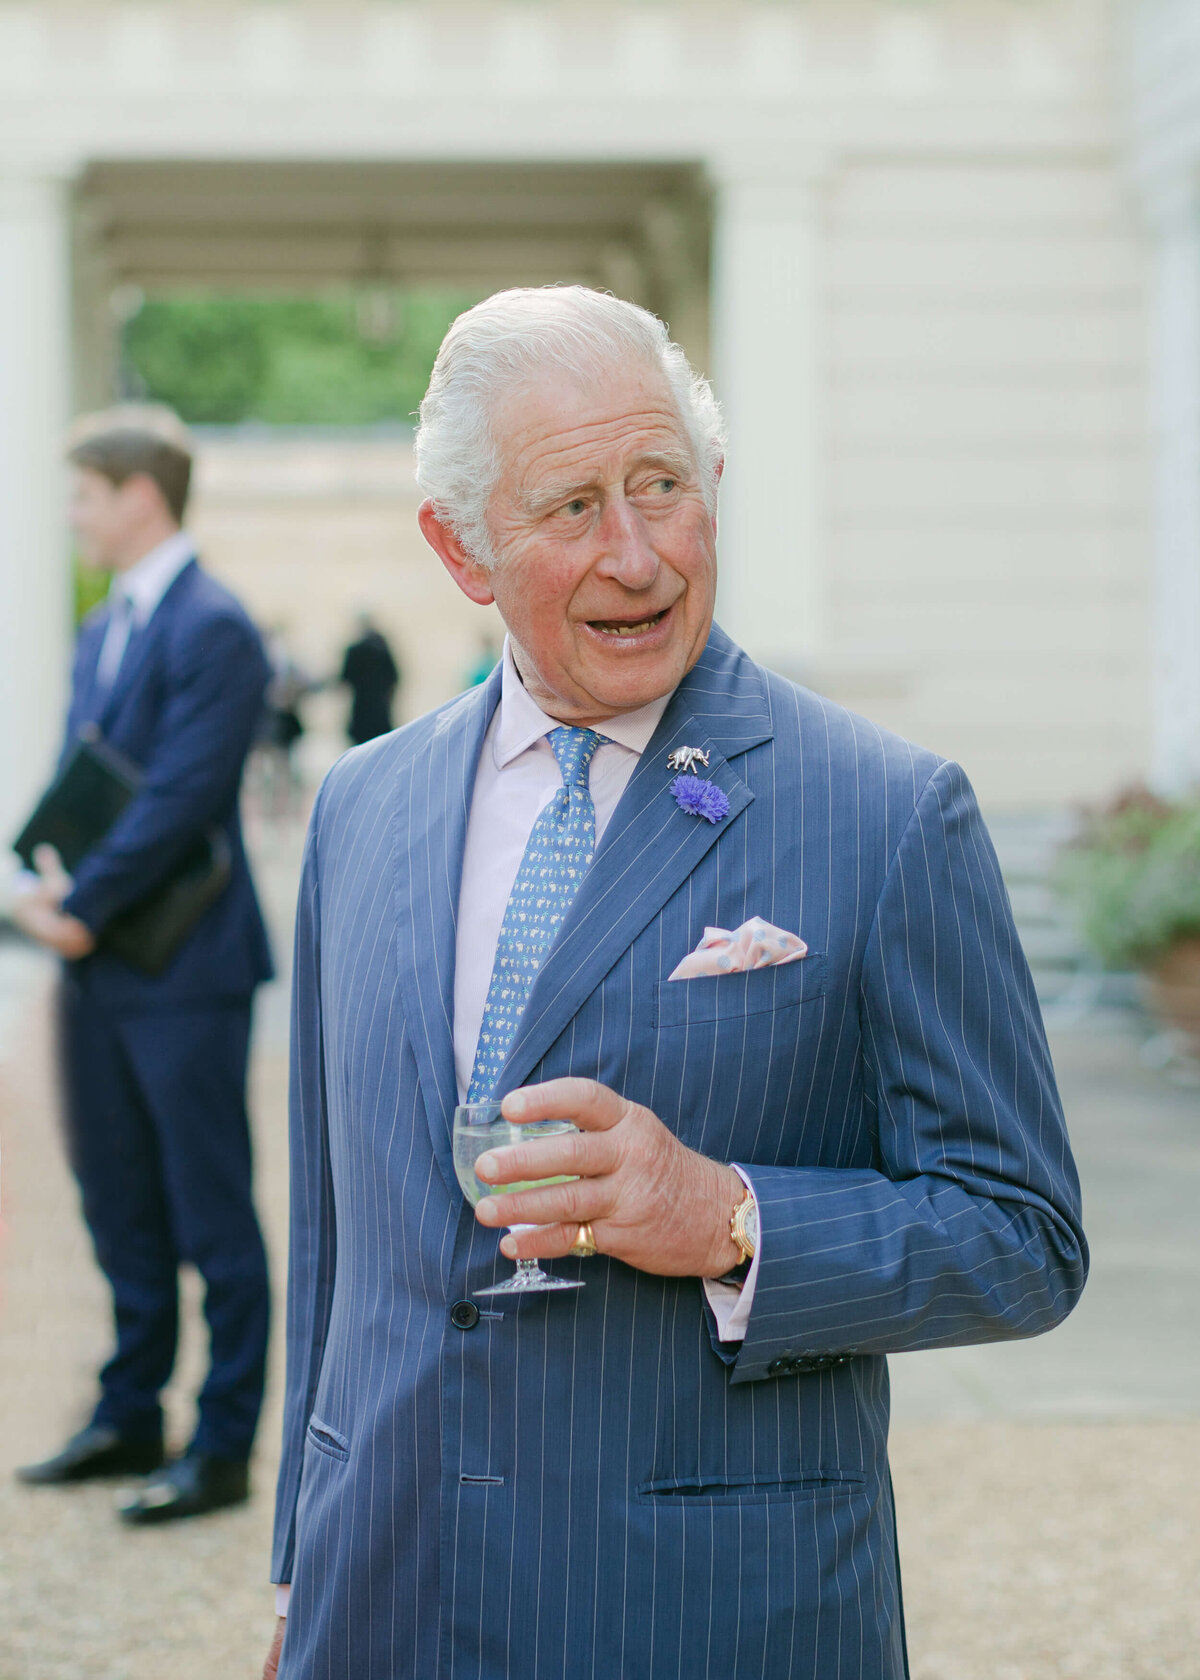 chloe-winstanley-events-clarence-house-prince-charles-smiling